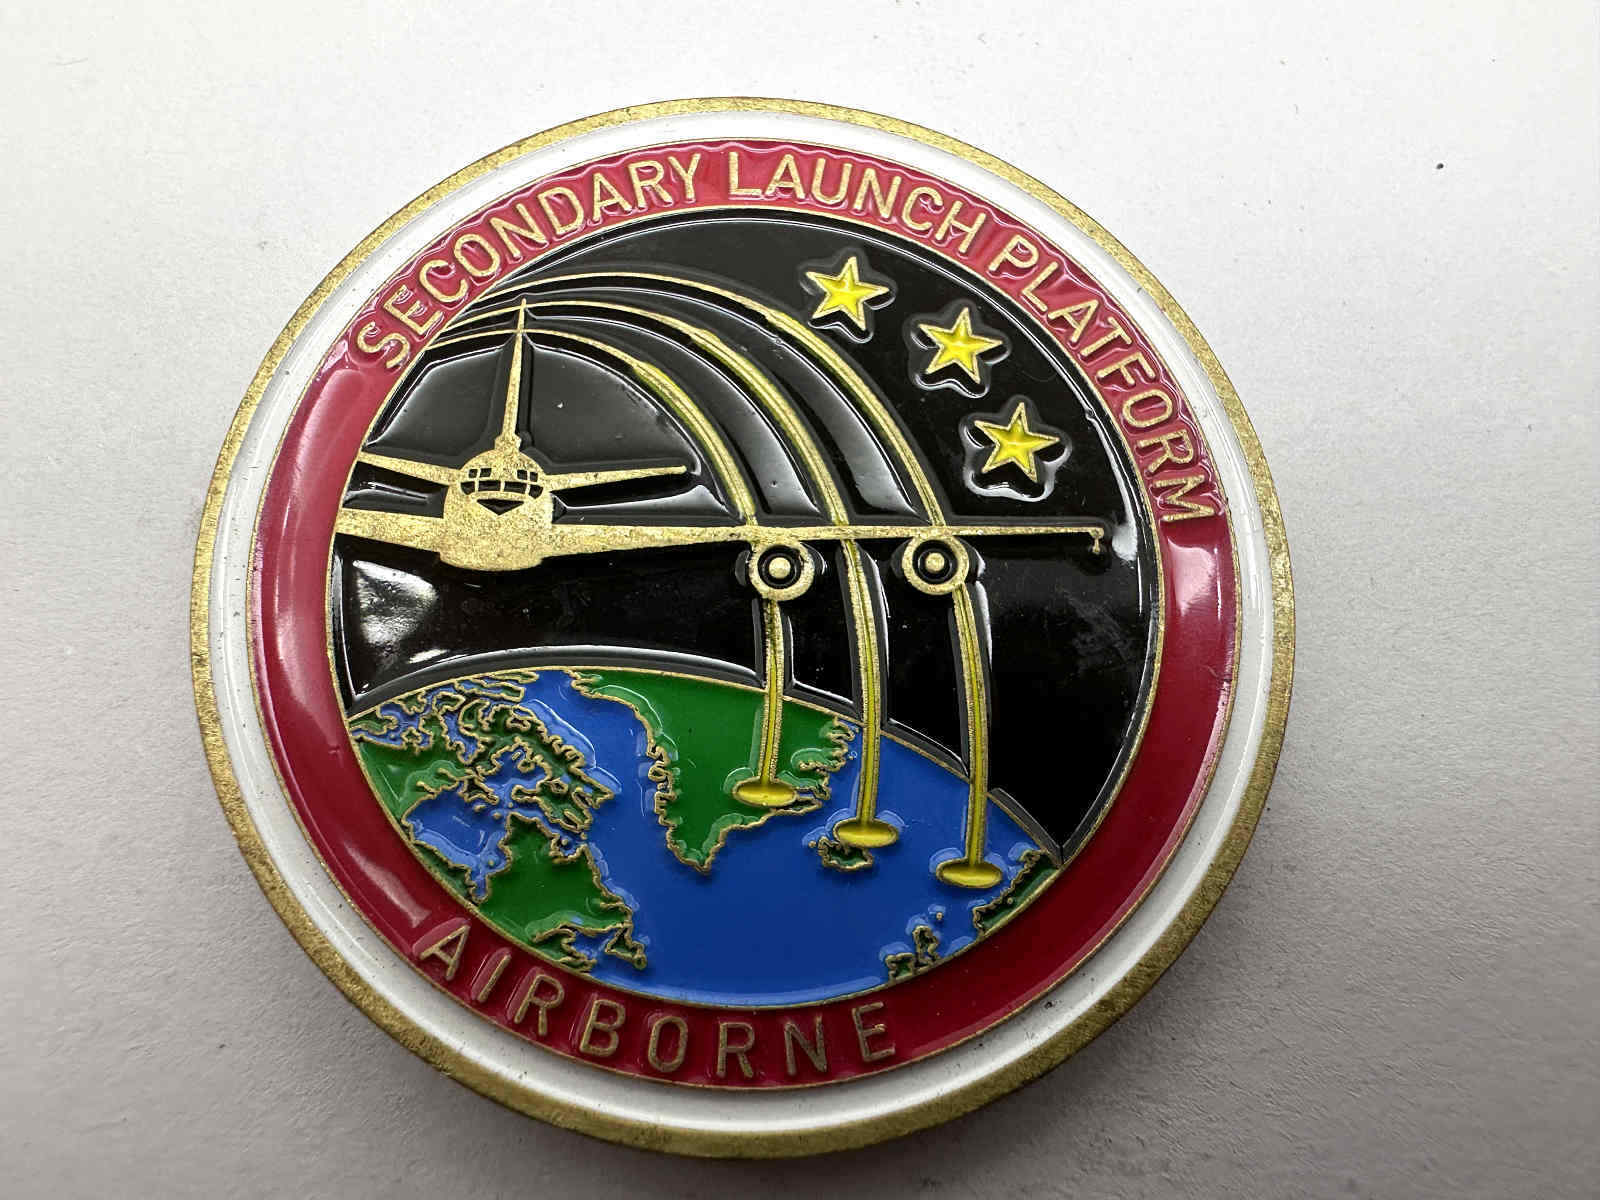 UNITED STATES AIR FORCE SECONDARY LAUNCH PLATFORM AIRBORNE CHALLENGE COIN